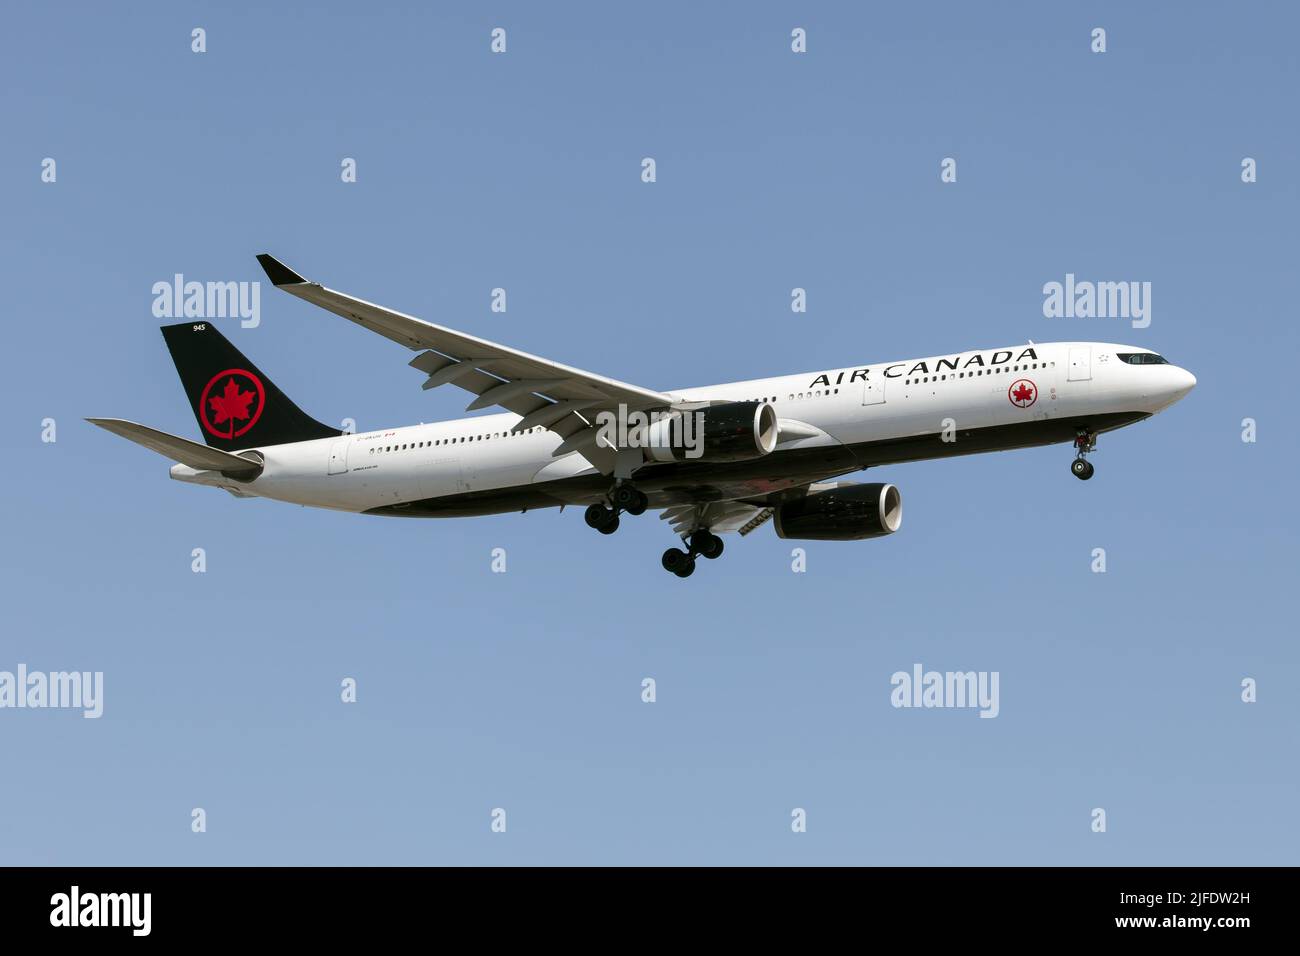 An Air Canada Airbus 330-300 landing at Montreal Pierre Elliott Trudeau Int'l Airport. Air Canada is the flag carrier and the largest airline of Canada by fleet size and passengers carried. Air Canada maintains its headquarters in Montreal, Quebec. Stock Photo